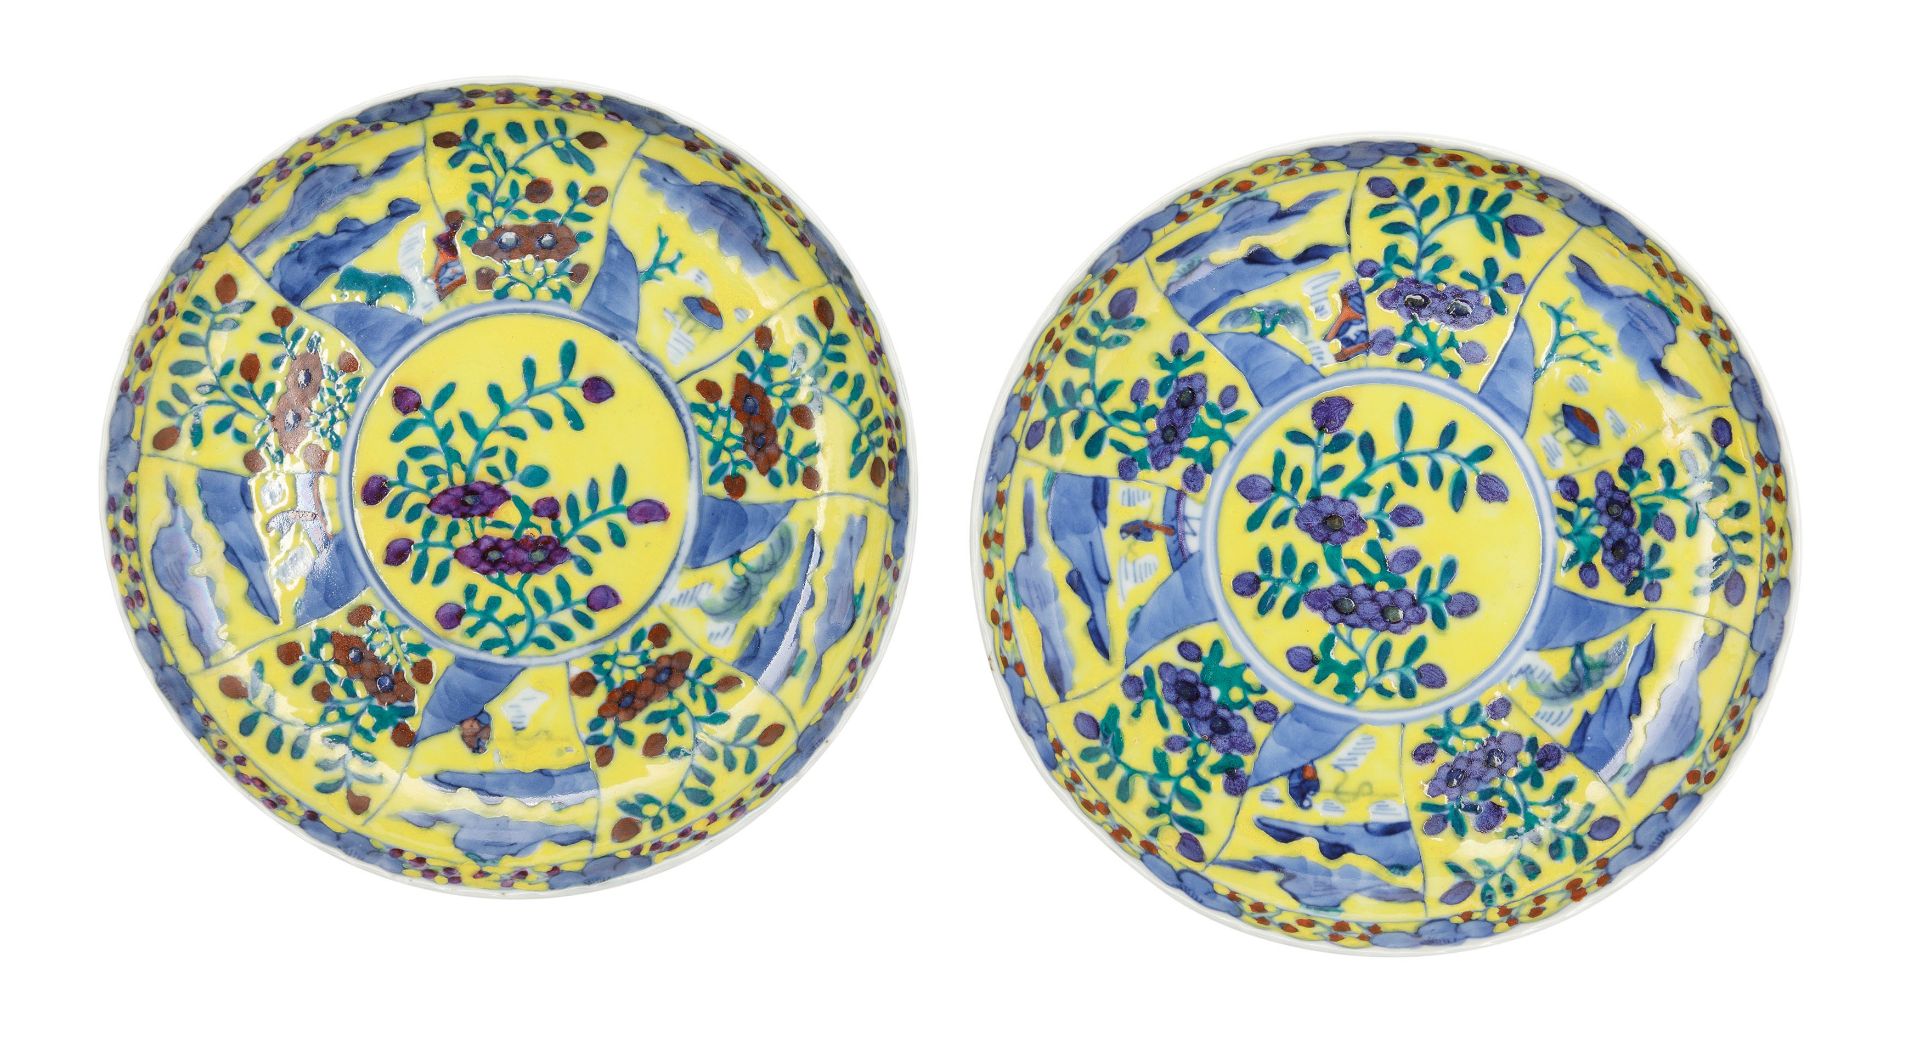 A PAIR OF YELLOW GROUND PORCELAIN SAUCER DISHES, CHINA, 20TH CENTURY, APOCRYPHAL KANGXI MARK (2)